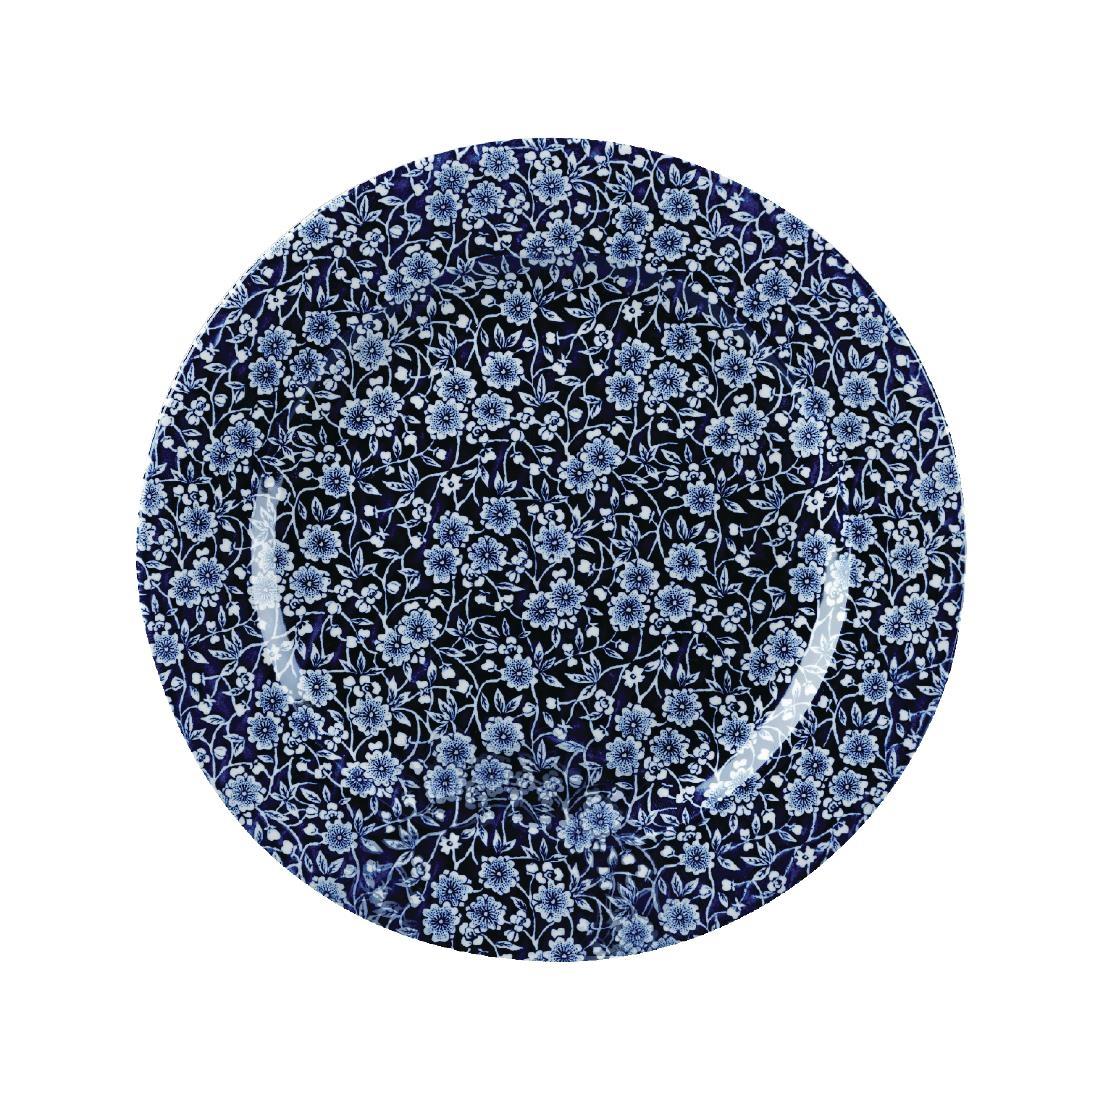 Churchill Vintage Prints Plates Willow Print 276mm (Pack of 6) - GF305  - 1